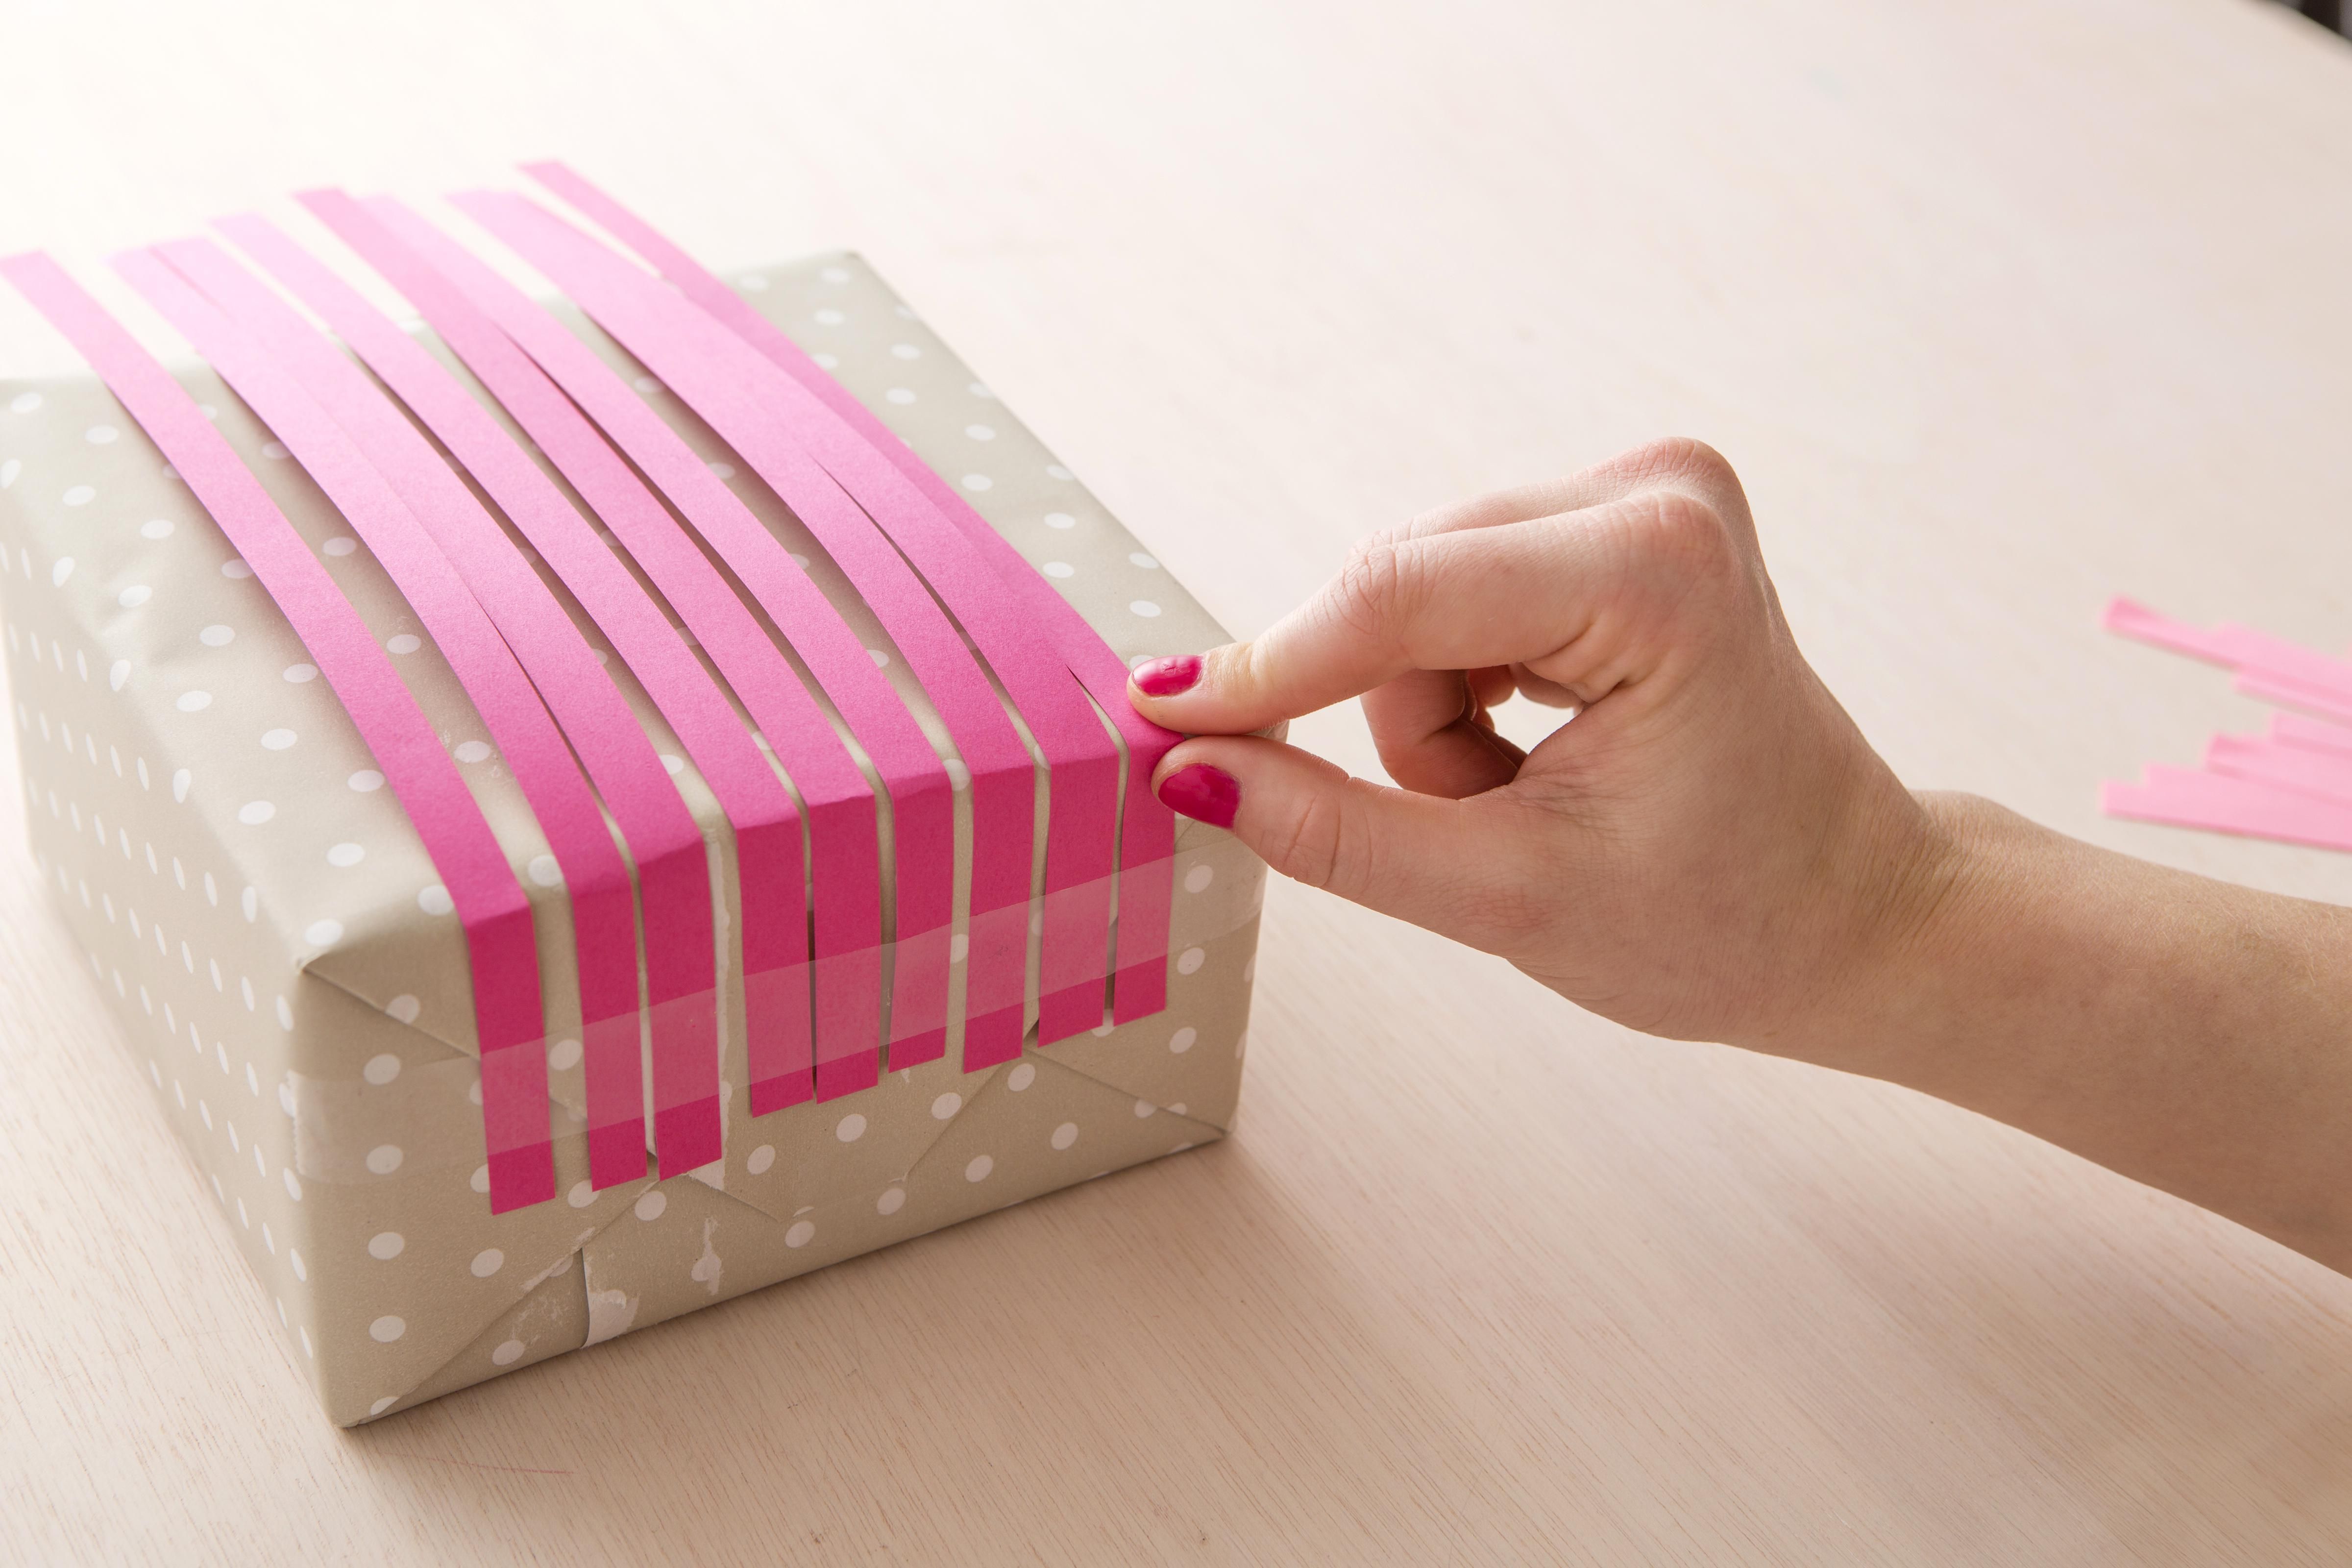 Last Minute Gift Wrap Alert! DIY Washi Tape Wrapping Paper - Brit + Co